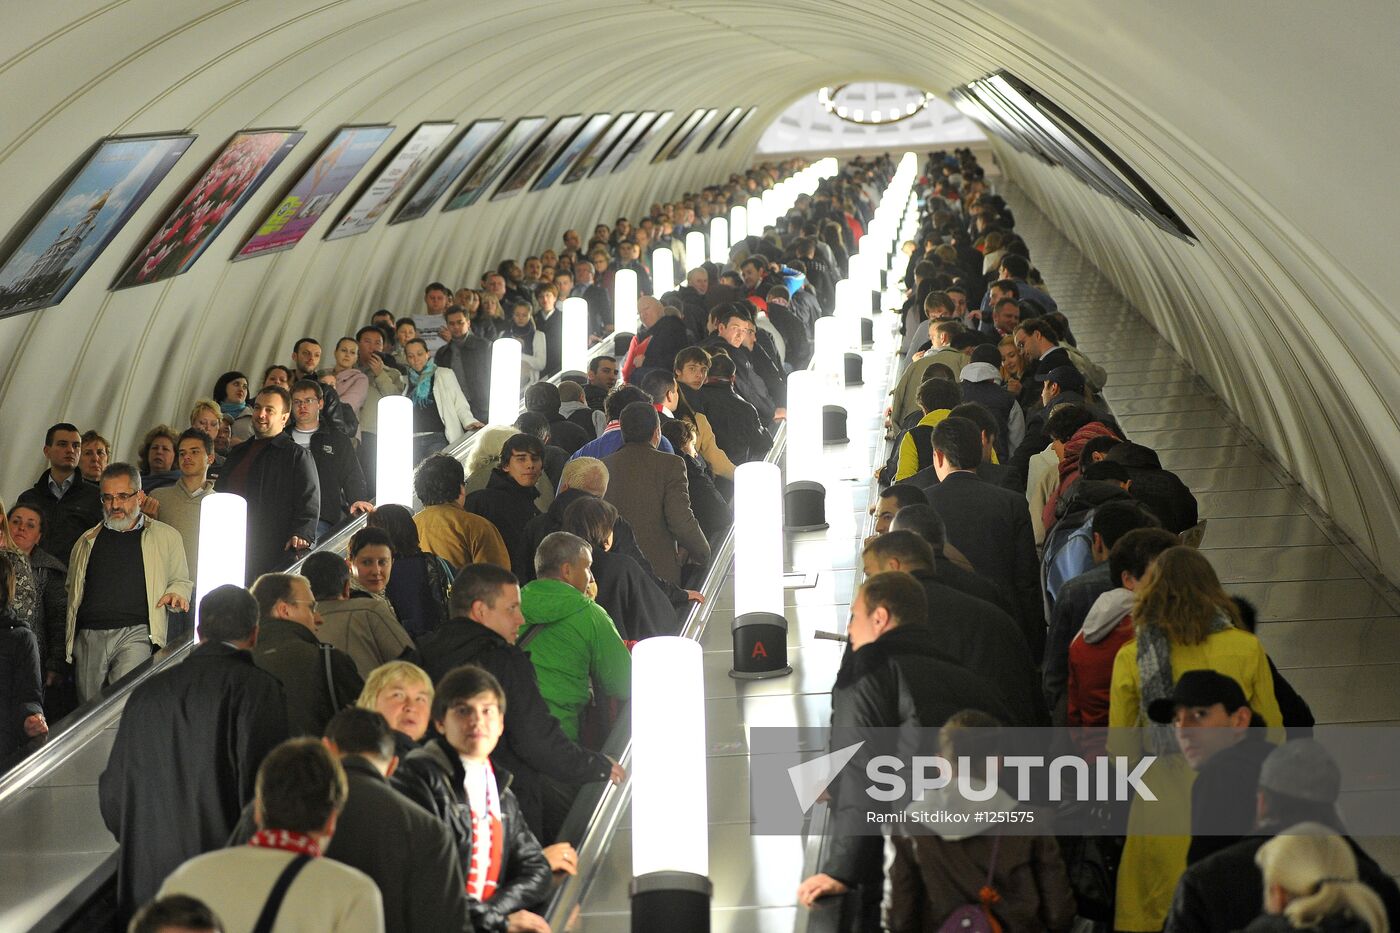 Moscow's subway during rush hour